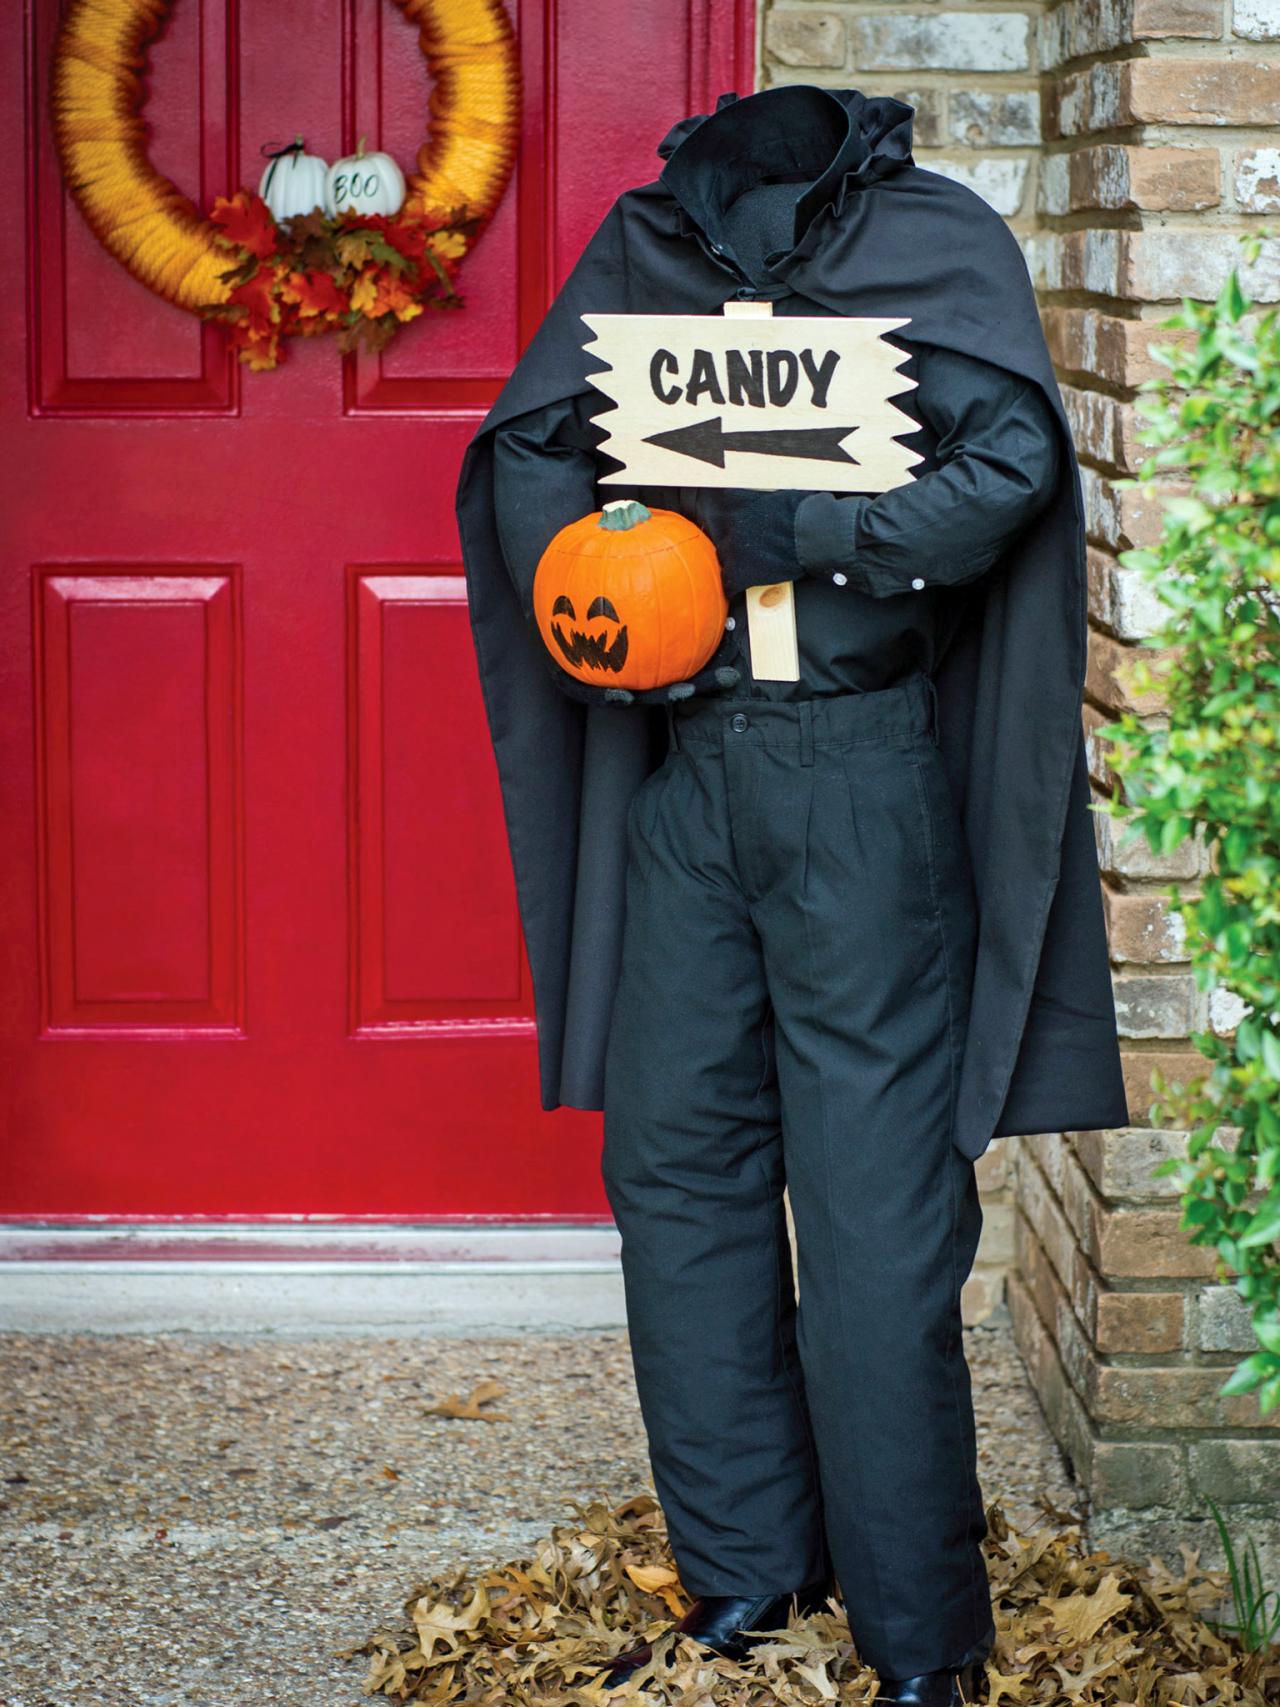 25 DIY Halloween Decorations to Make This Year - Crazy Little Projects